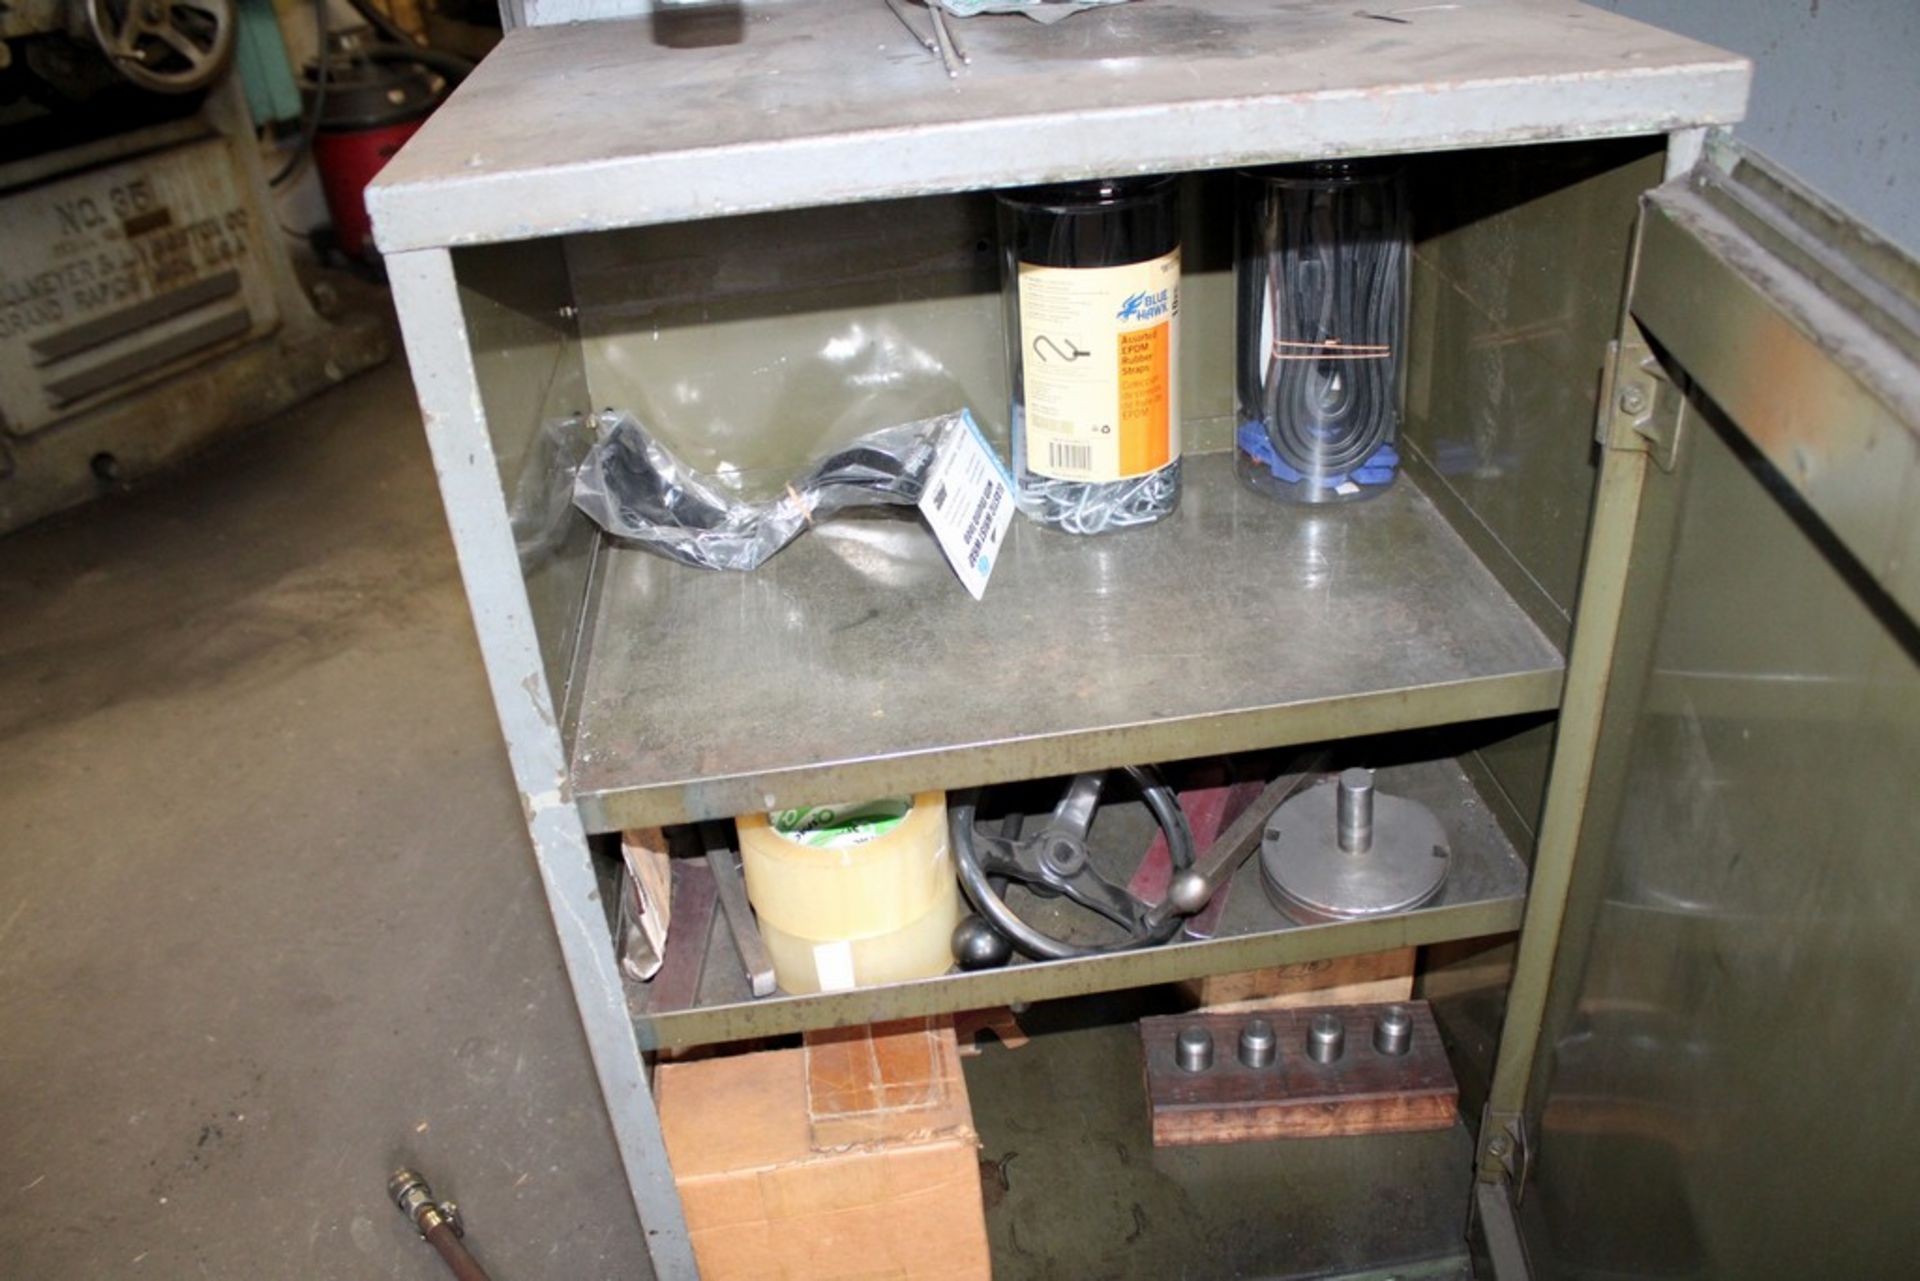 Steel Storage Cabinet and Contents - 21" x 15" x 34" H - Image 2 of 2